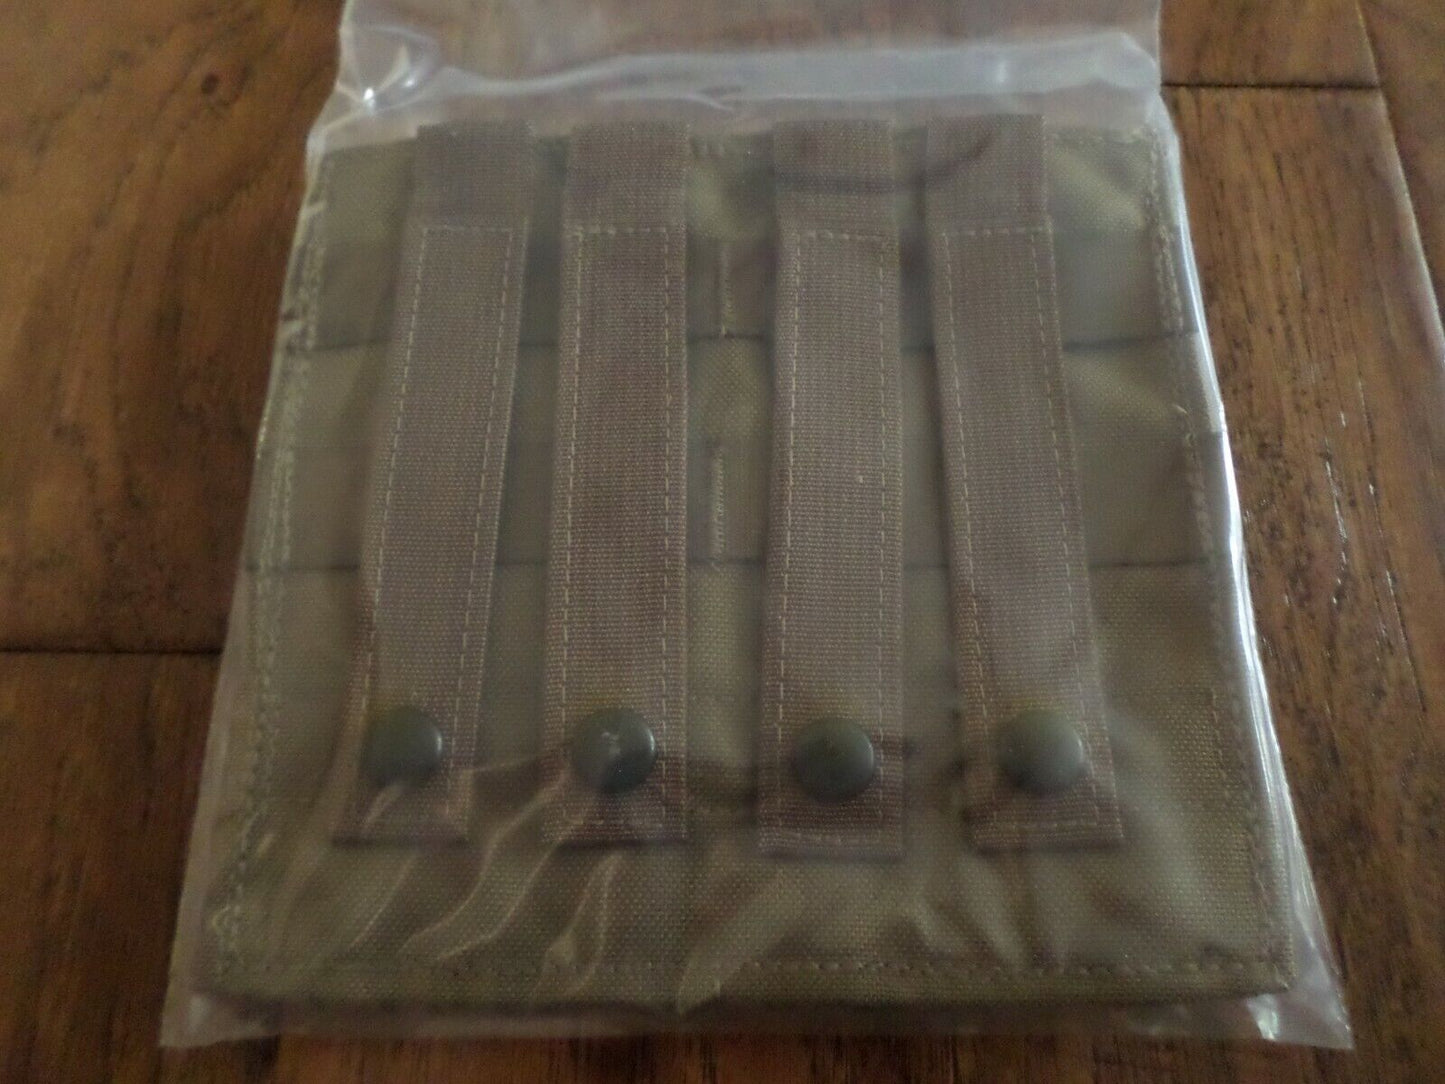 MARINE CORPS MILITARY UNIVERSAL MAGAZINE MOLLE DOUBLE POUCH SPECTER GEAR USA